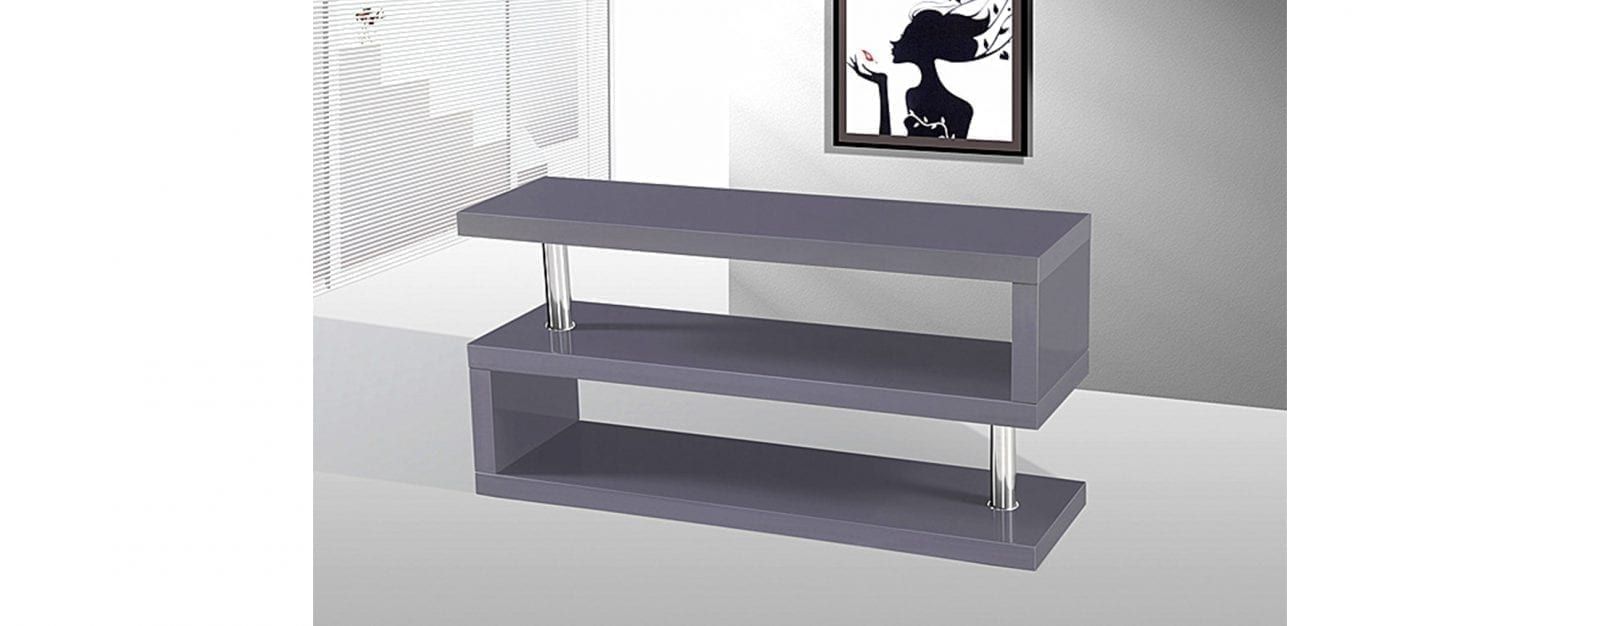 Charisma Tv Stand In Grey High Gloss | Allans Furniture Inside Charisma Tv Stands (Gallery 10 of 20)